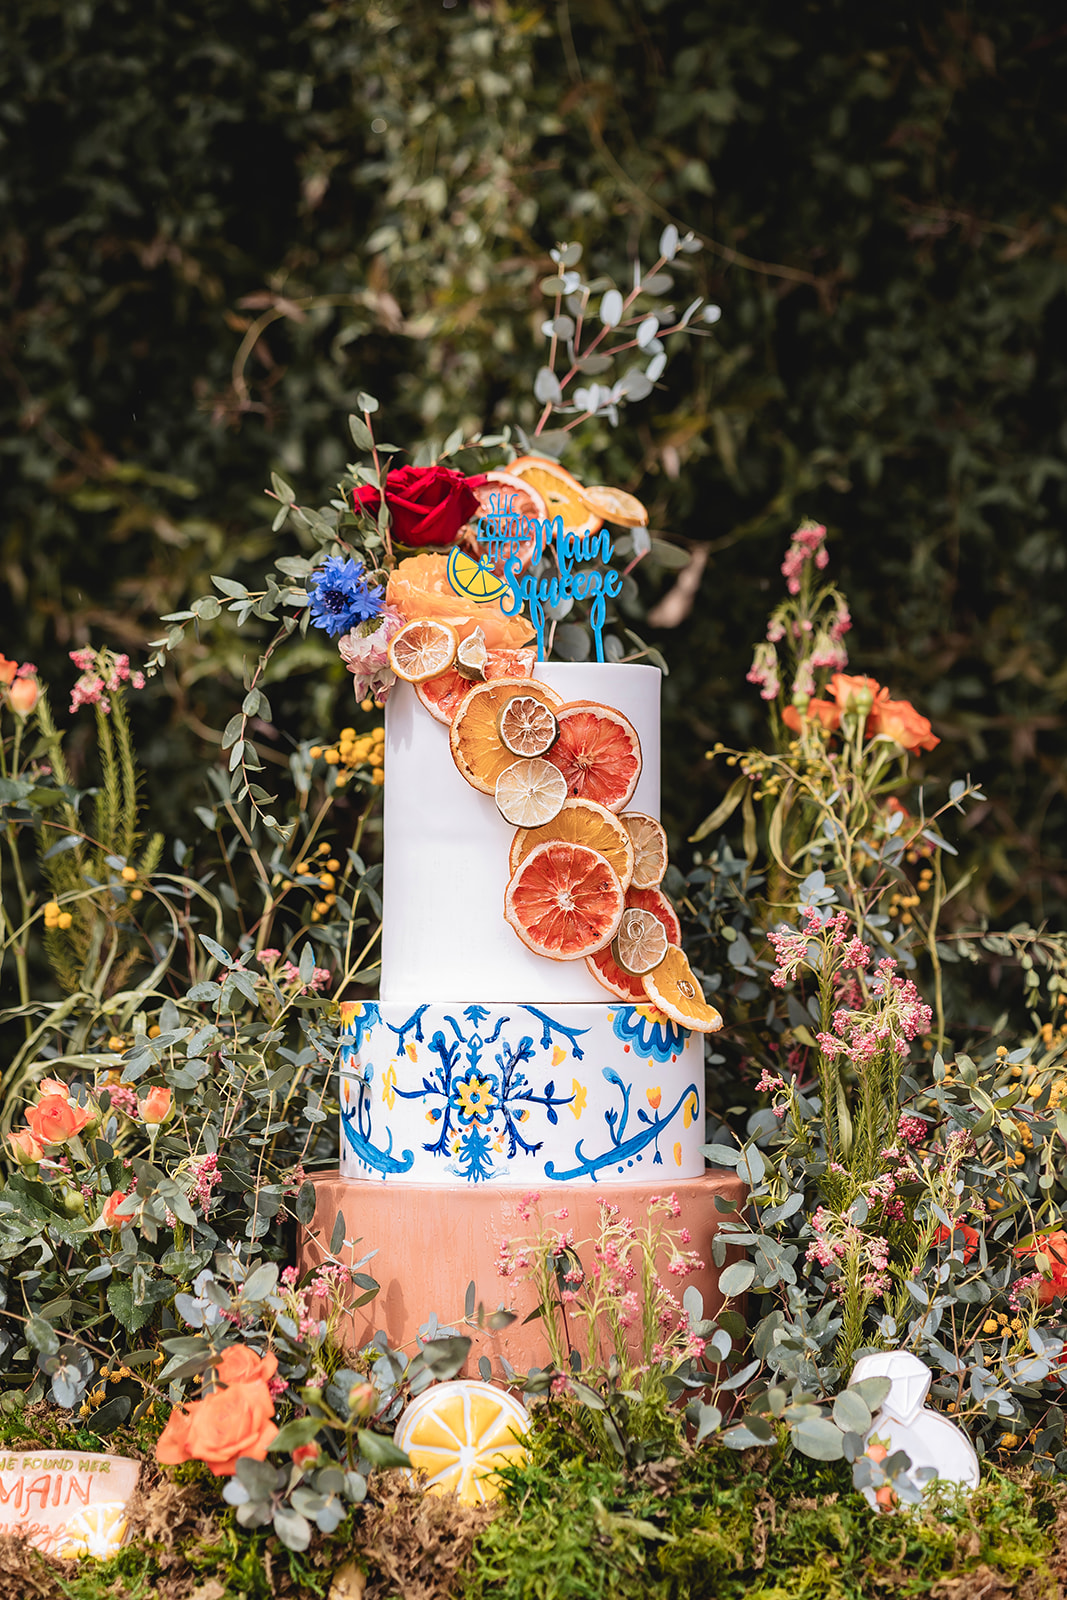 A unique cake with a summer feel and flowers for weddings spring event